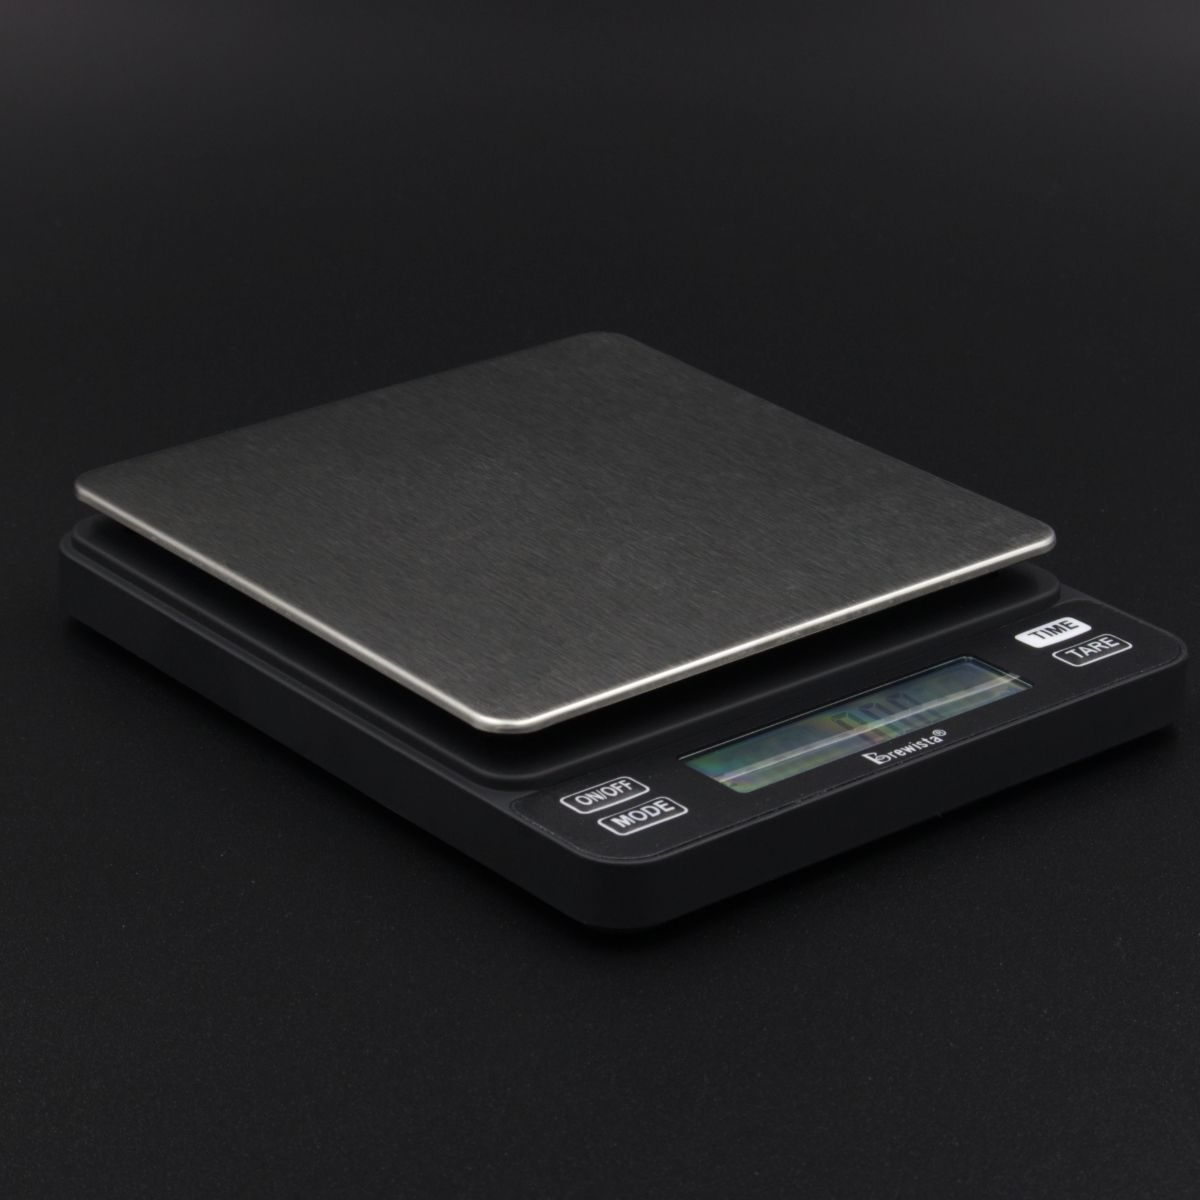 Brewista Smart Scale Review – Whole Latte Coffee